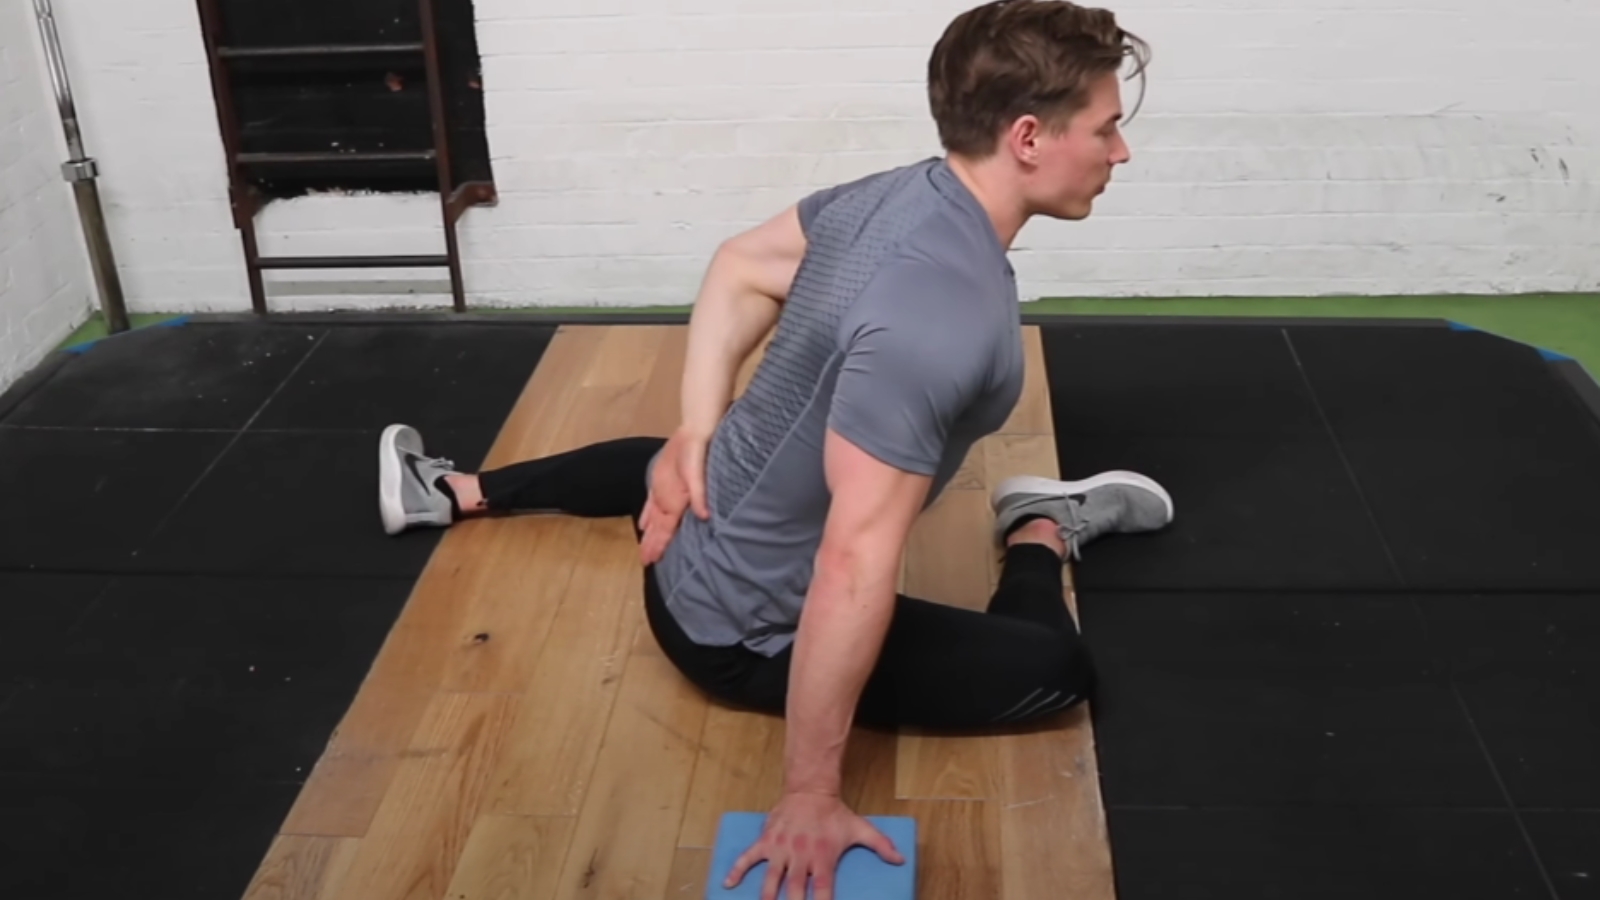 Calf Pain or Strain Stretches & Exercises - Ask Doctor Jo 